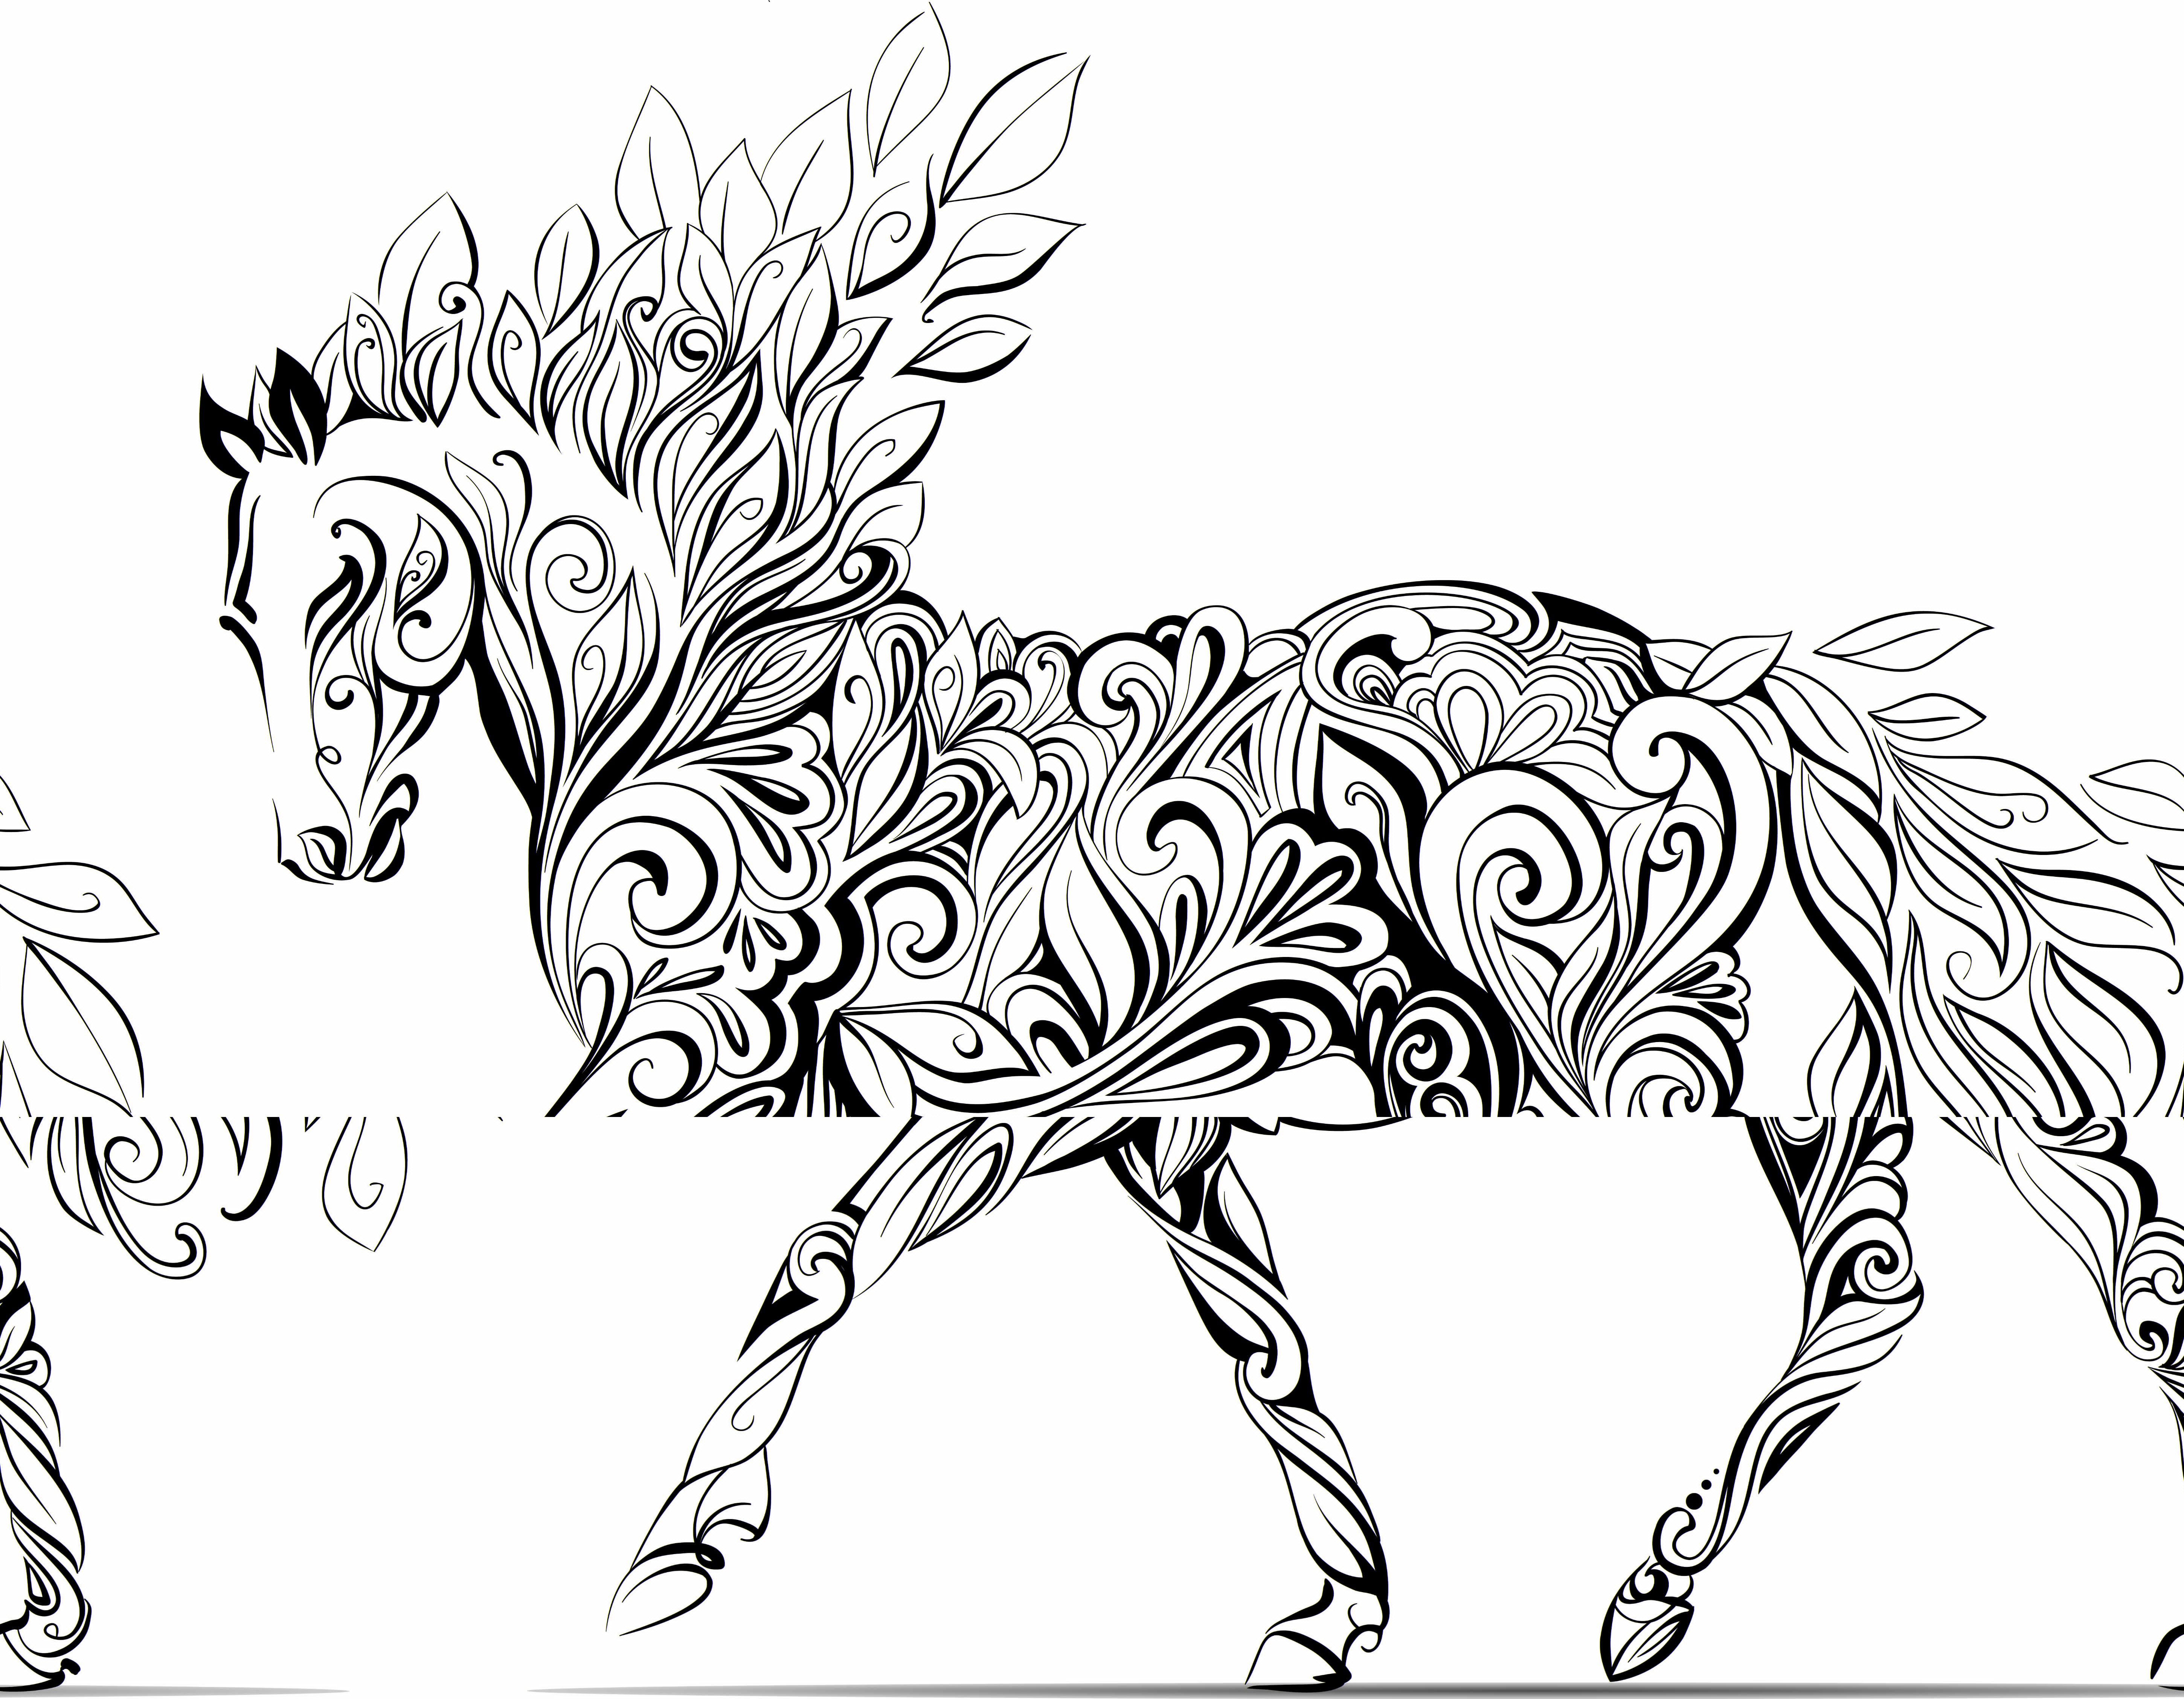 Zentangle Horse Coloring Pages at GetColorings.com | Free ...